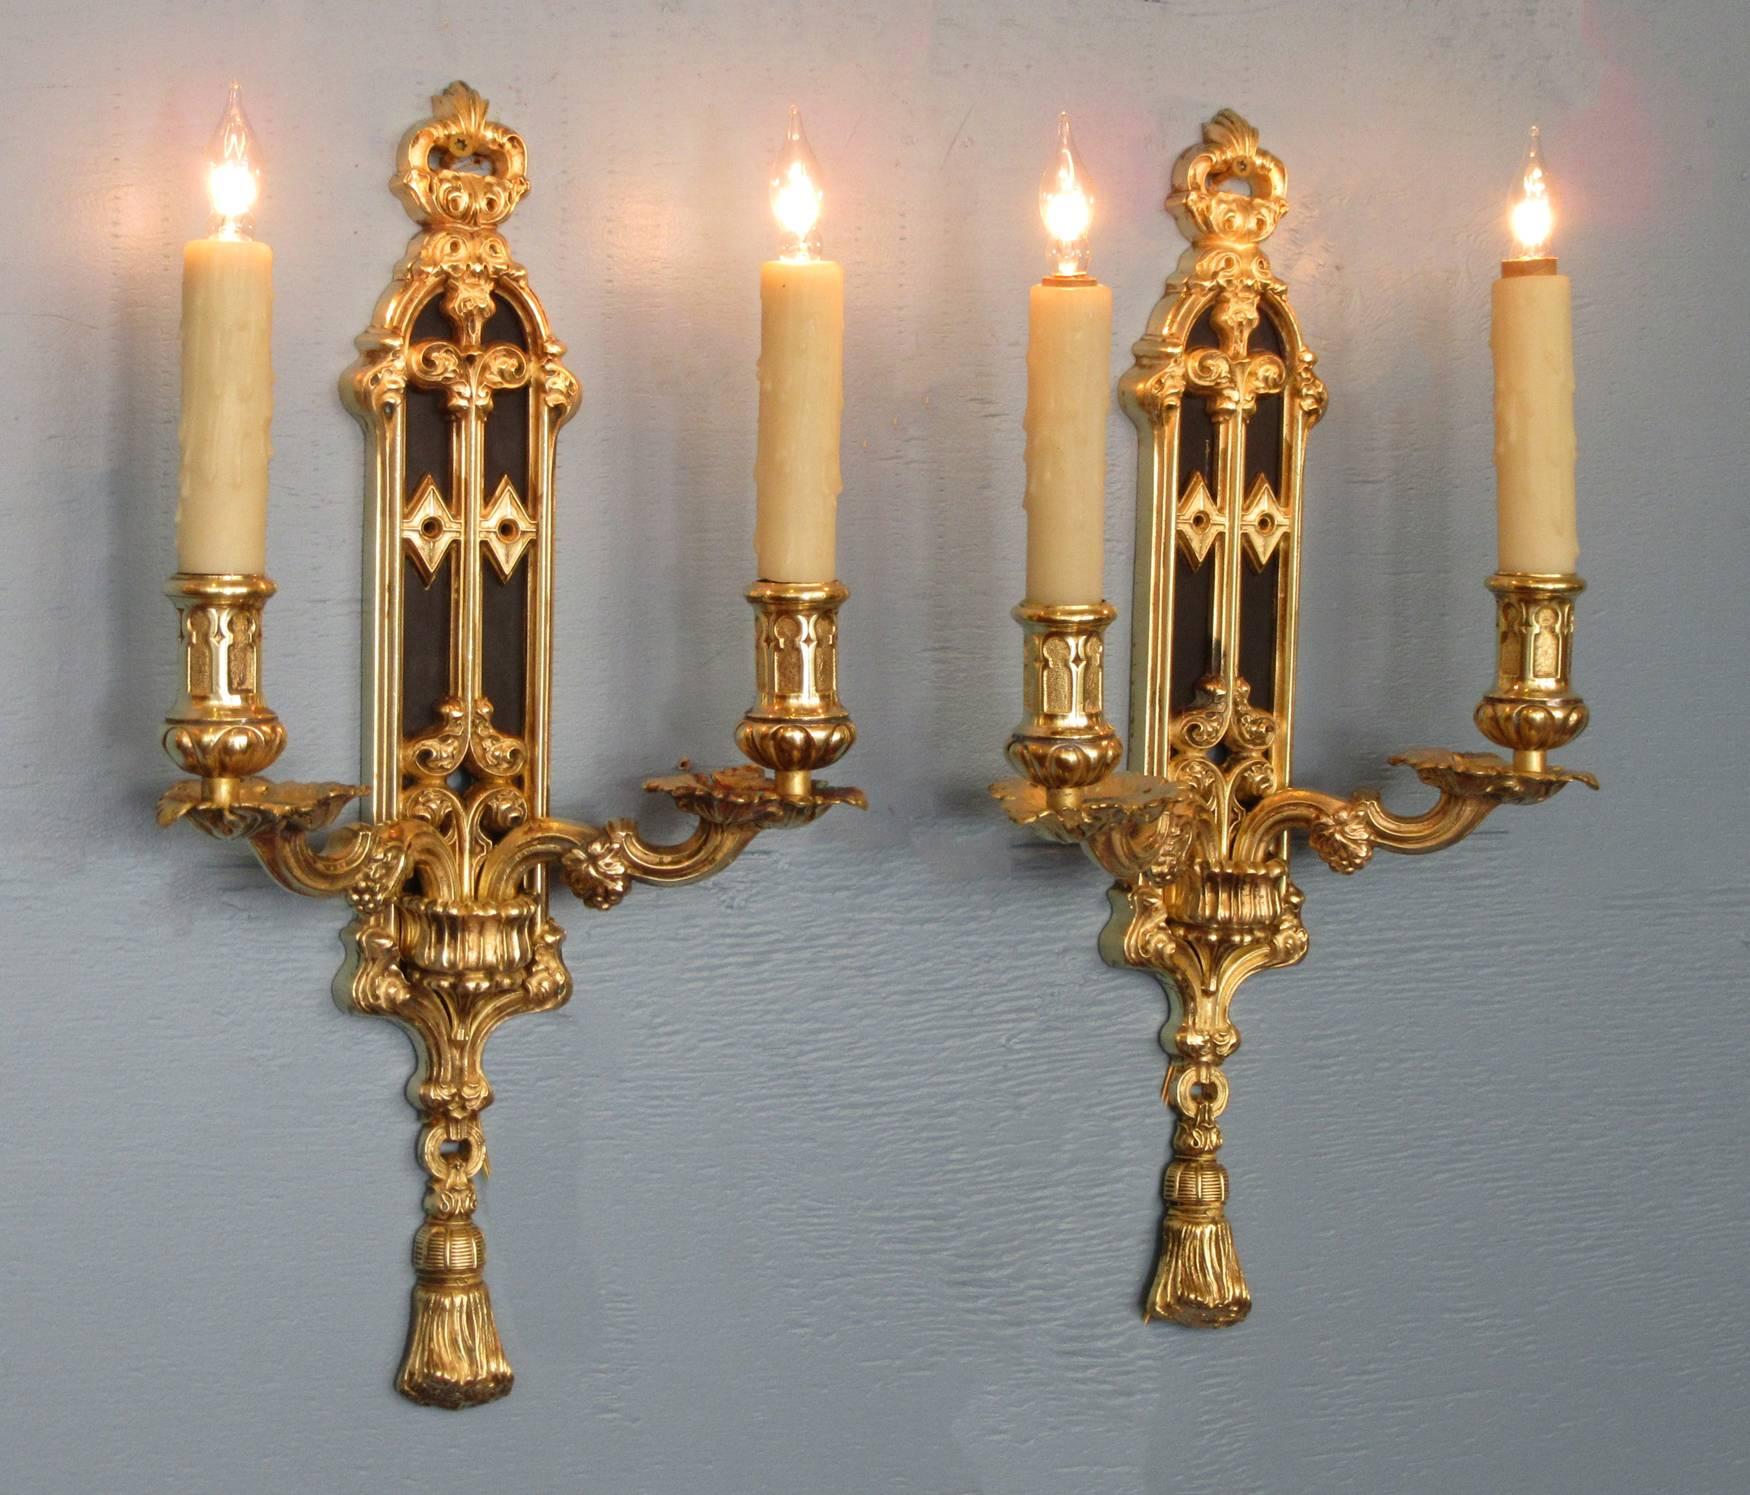 19th Century Pair of Mid 19th C English Gothic Bronze Doré and Patinated Sconces